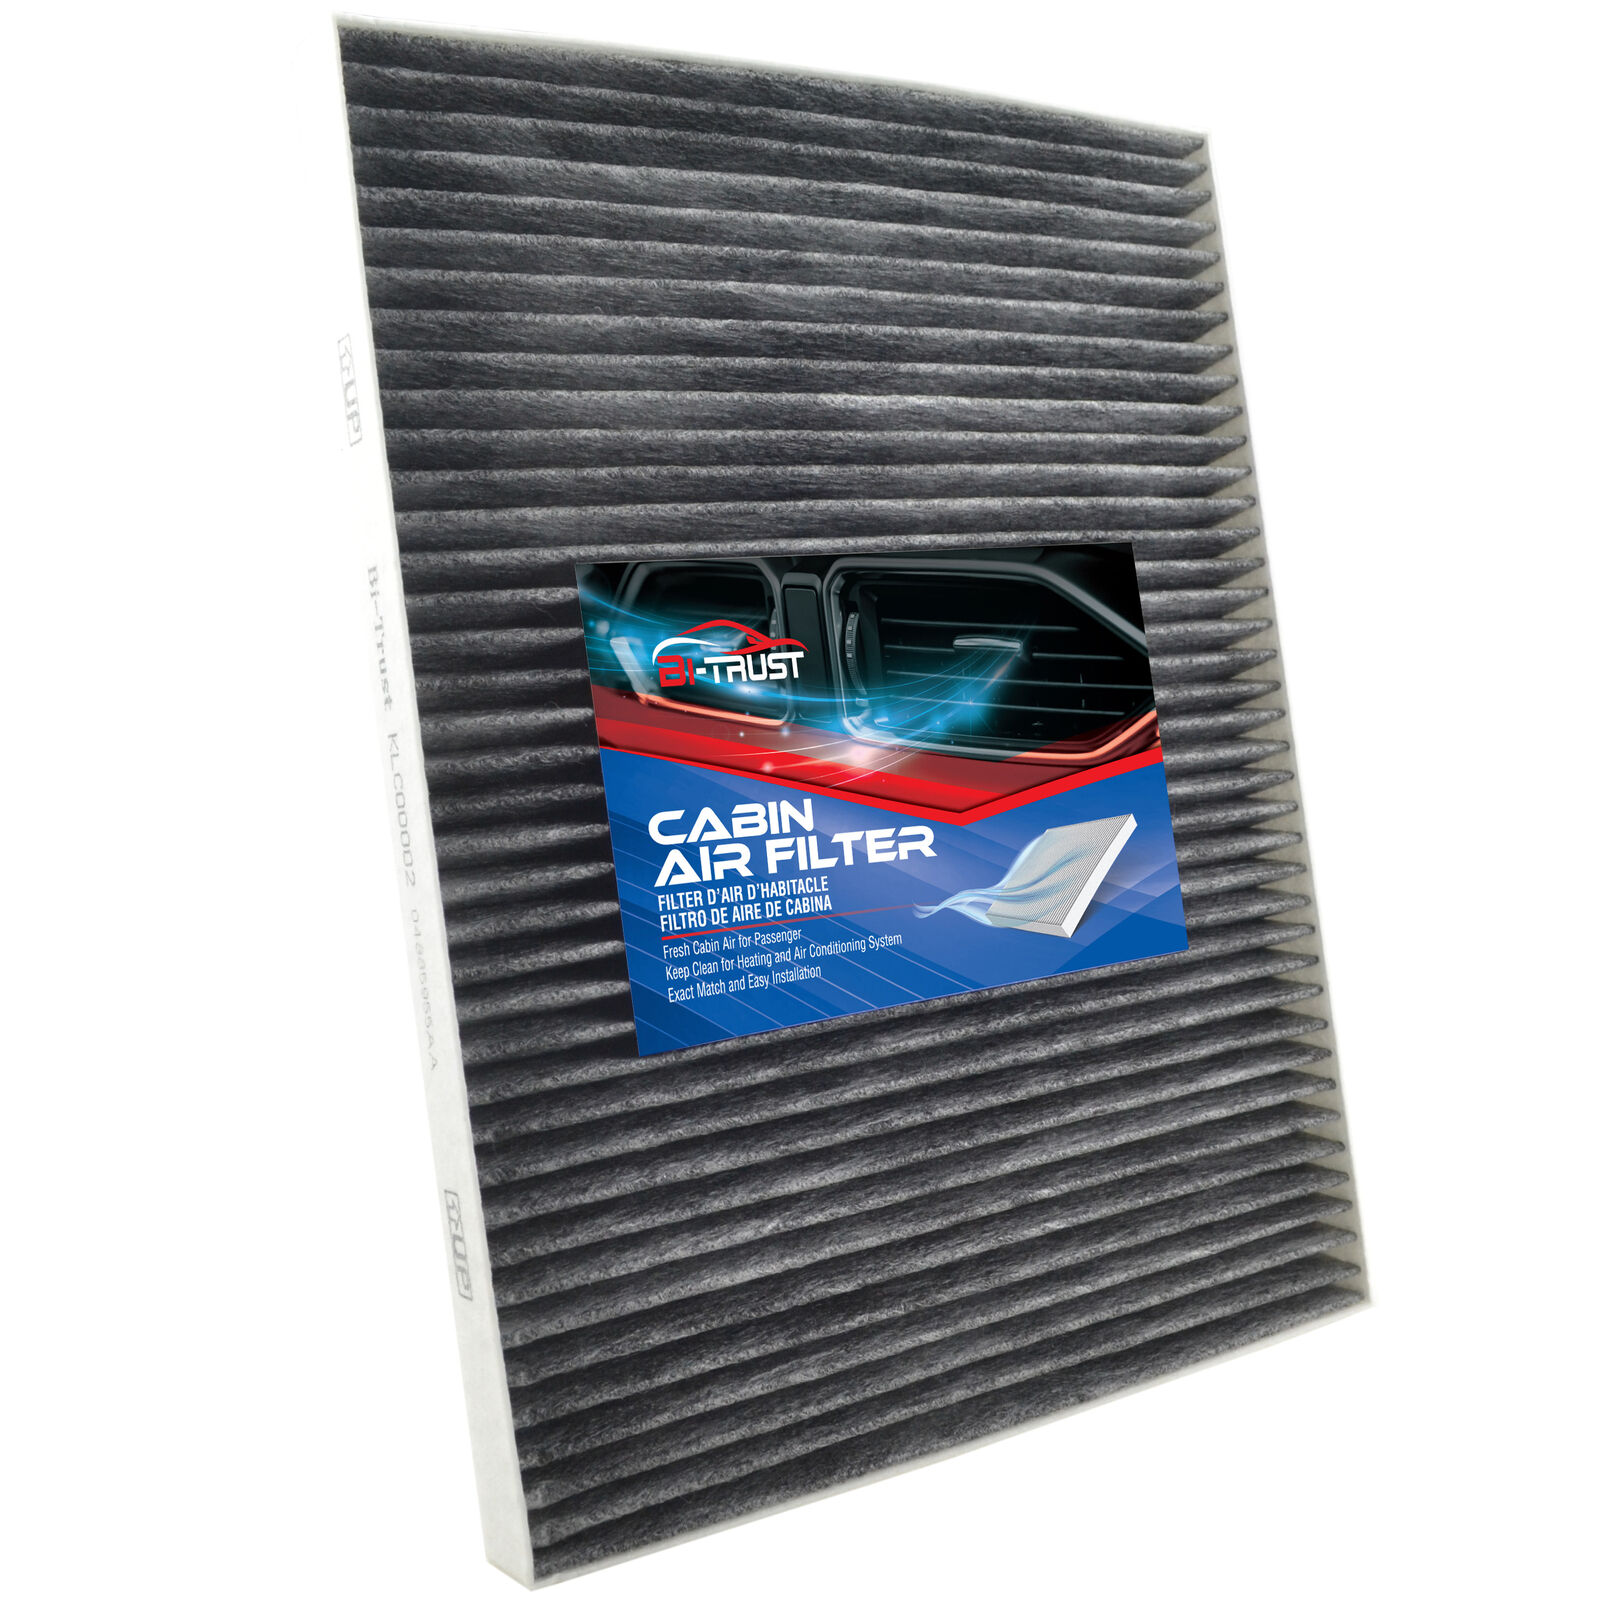 Cabin Air Filter for Chrysler Town & Country Dodge Grand Voyager 2000 Pacifica